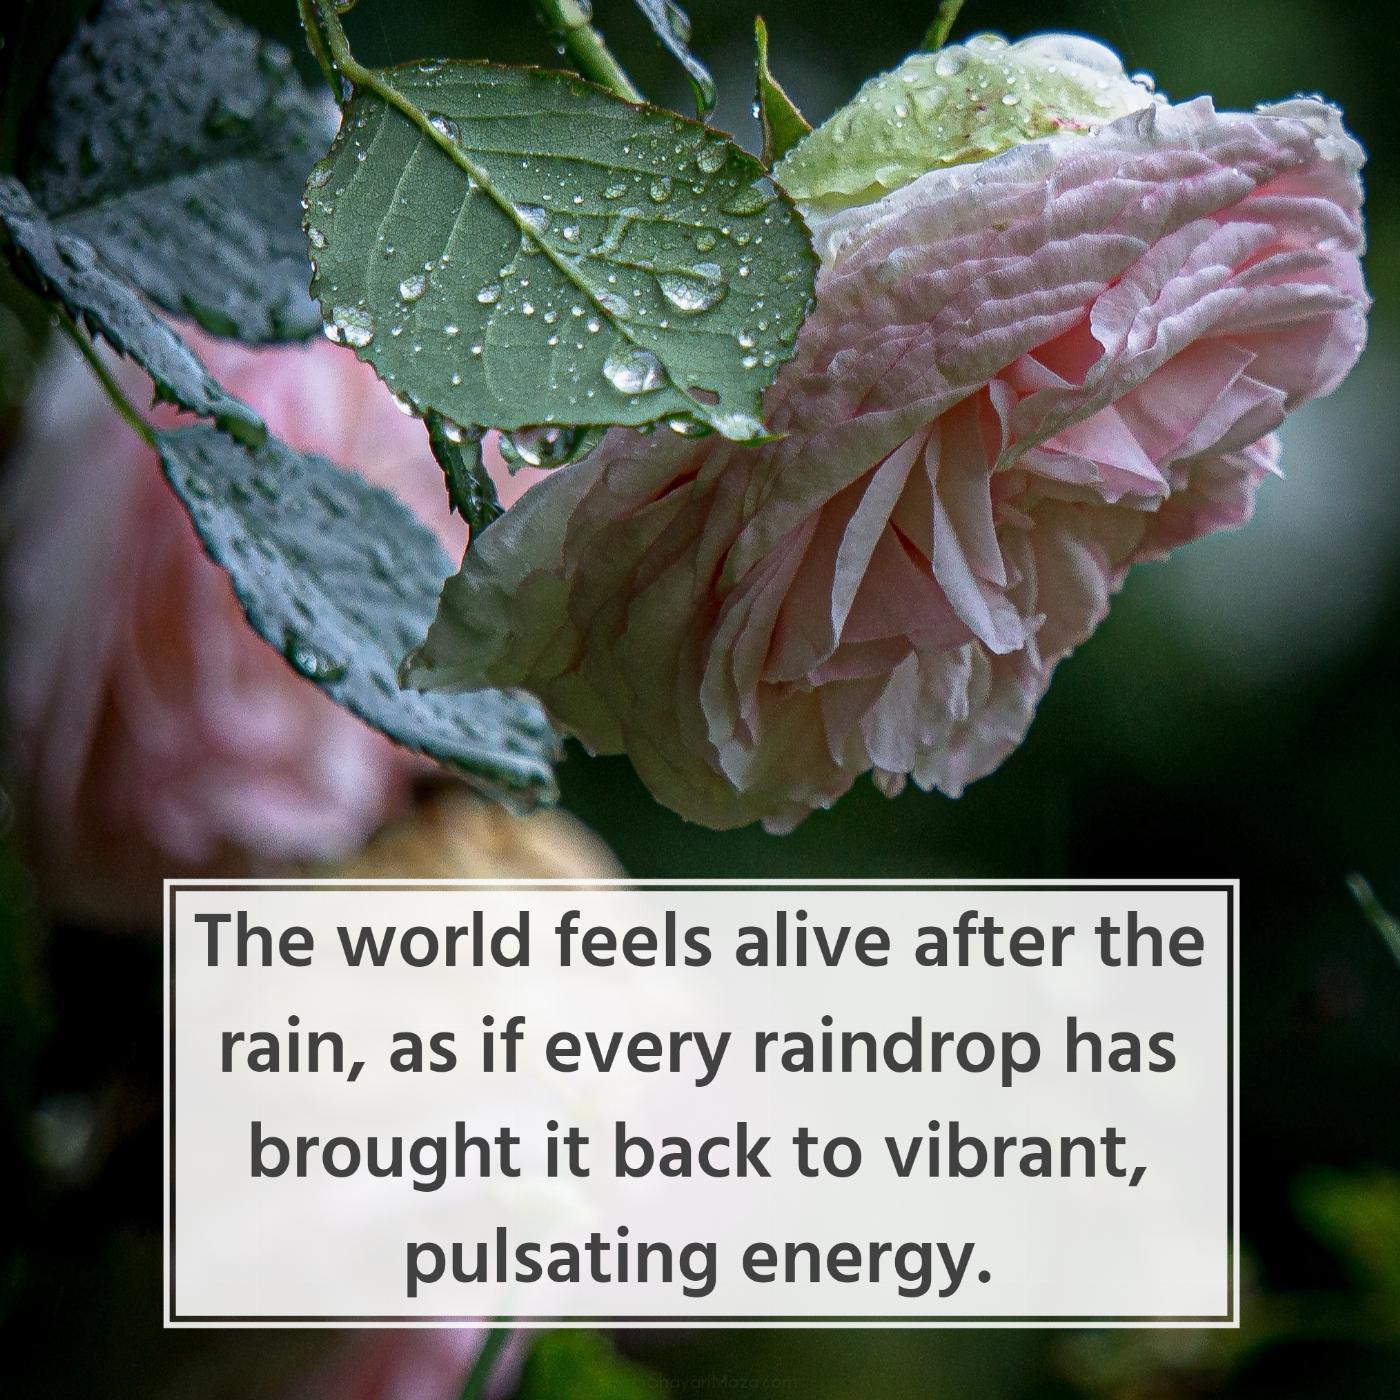 The world feels alive after the rain